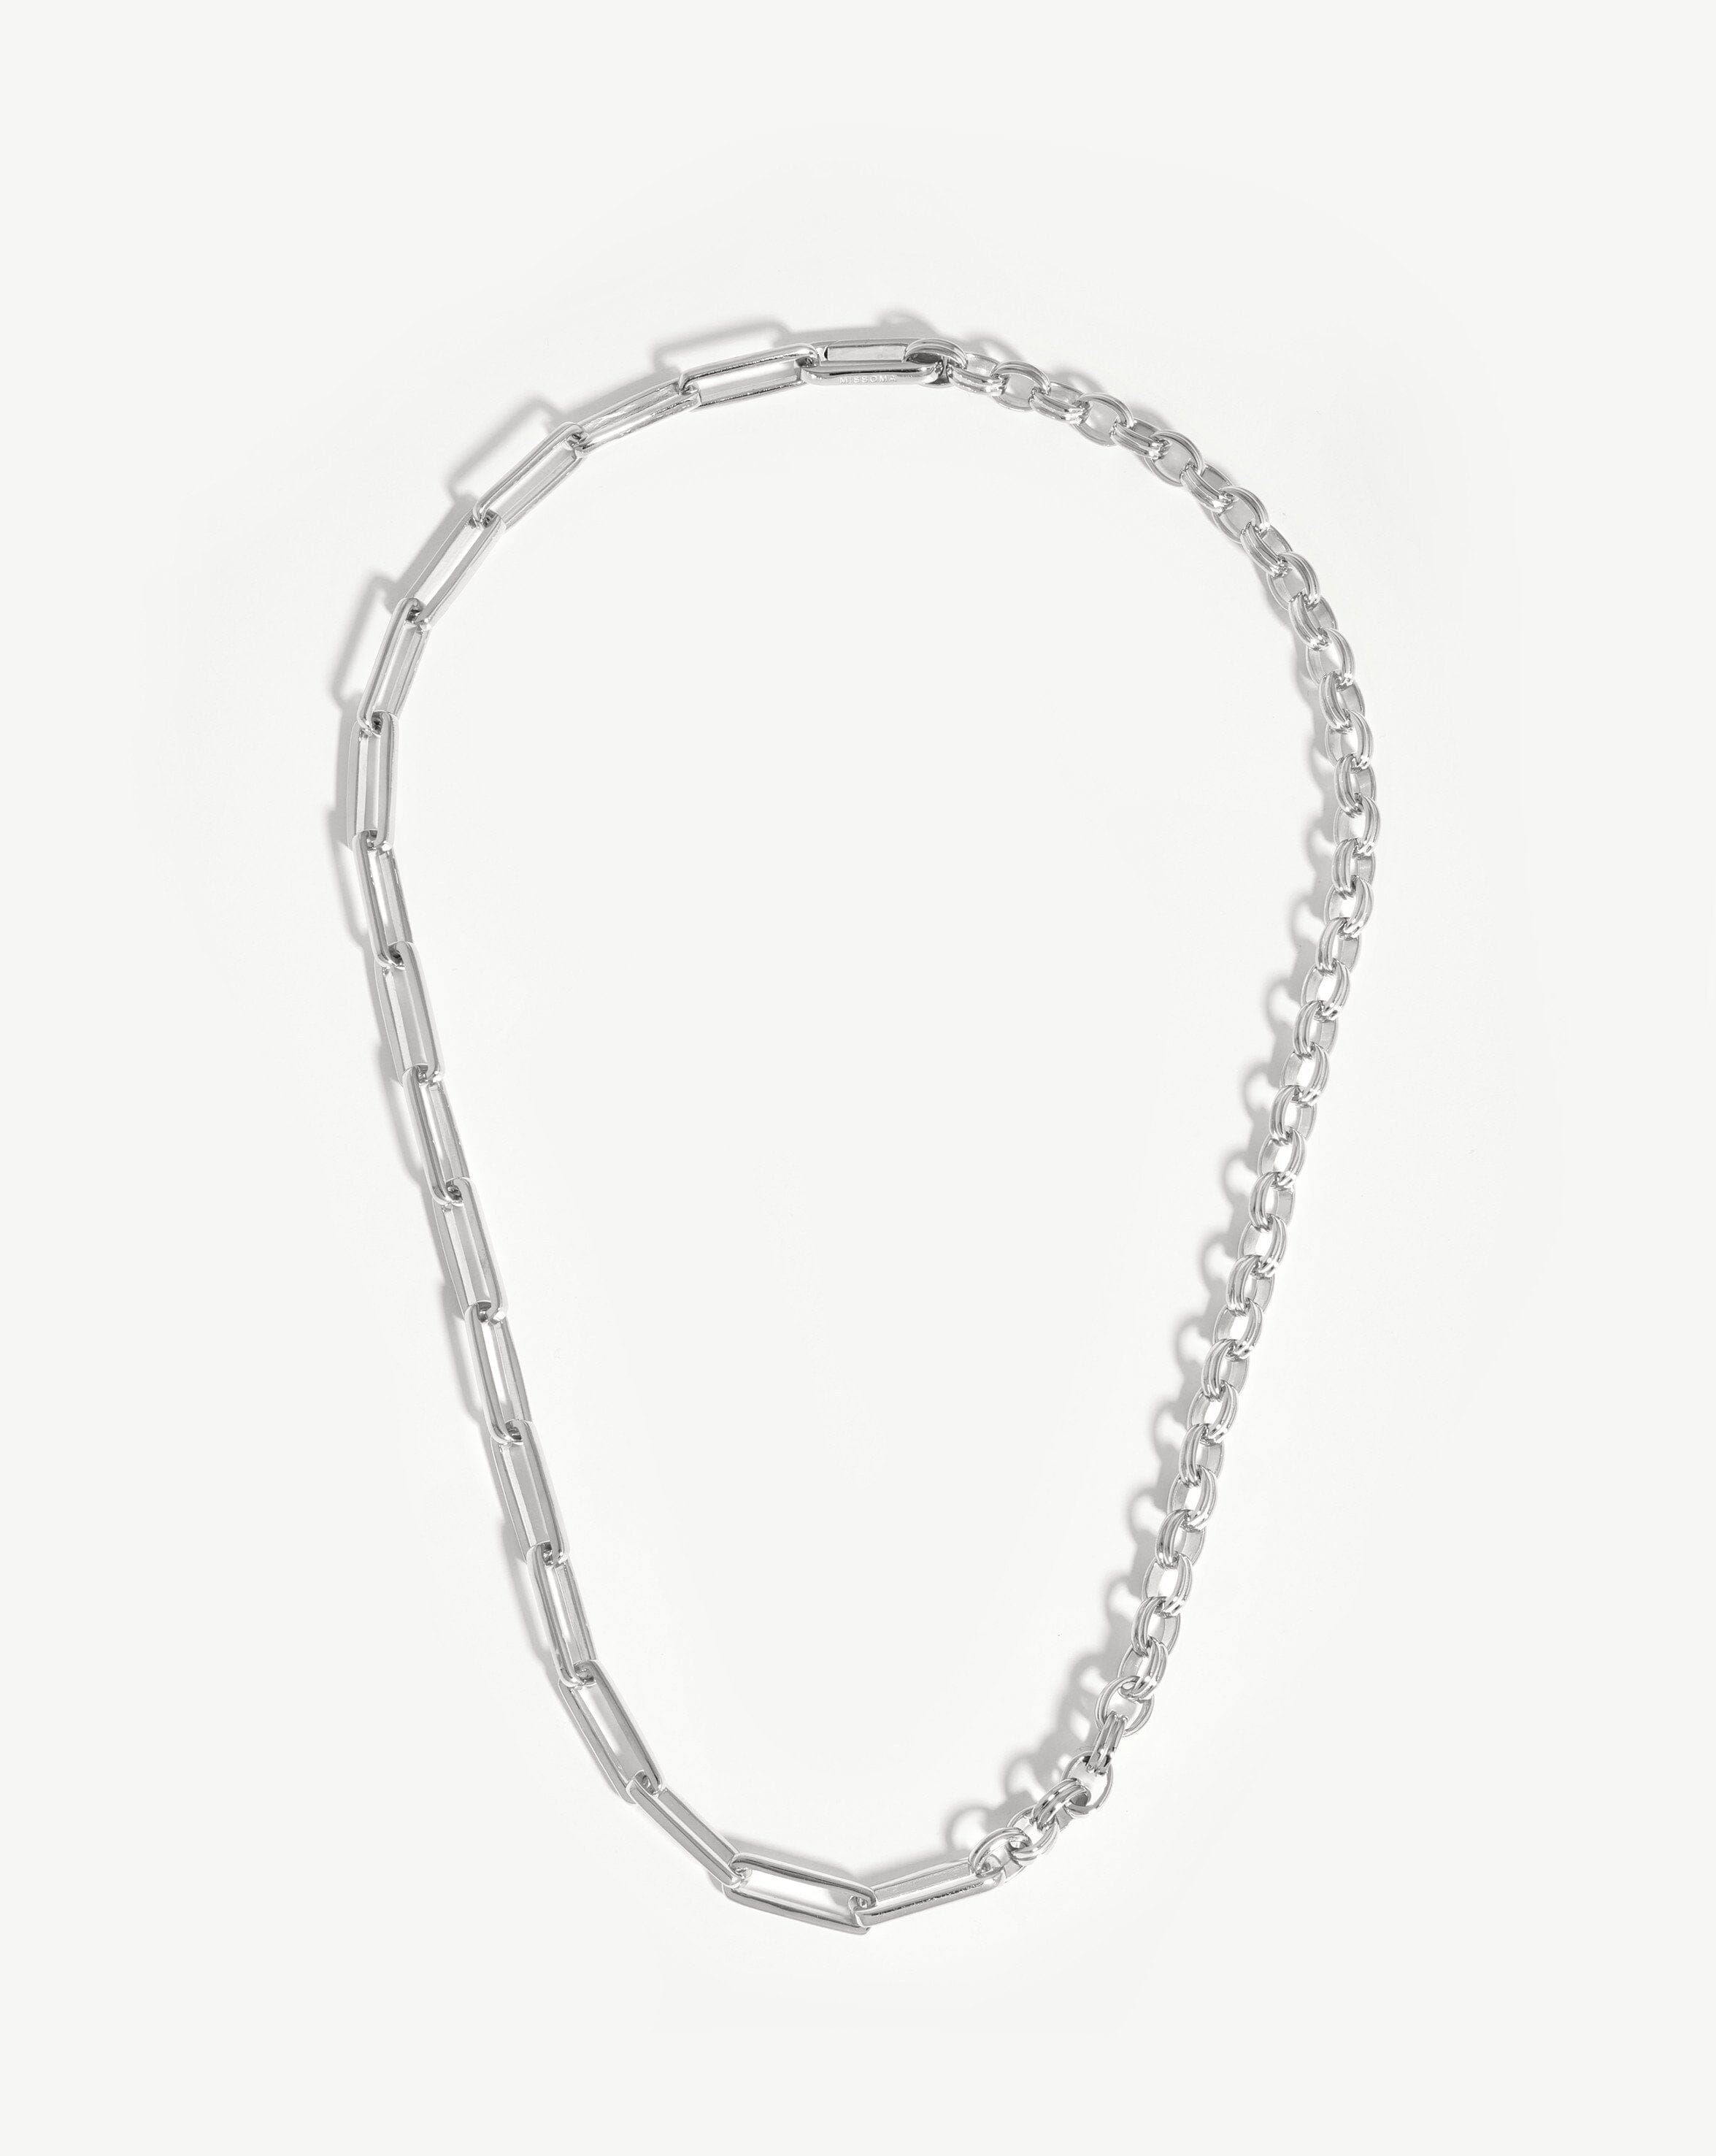 Deconstructed Axiom Chain Necklace | Silver Plated Necklaces Missoma 